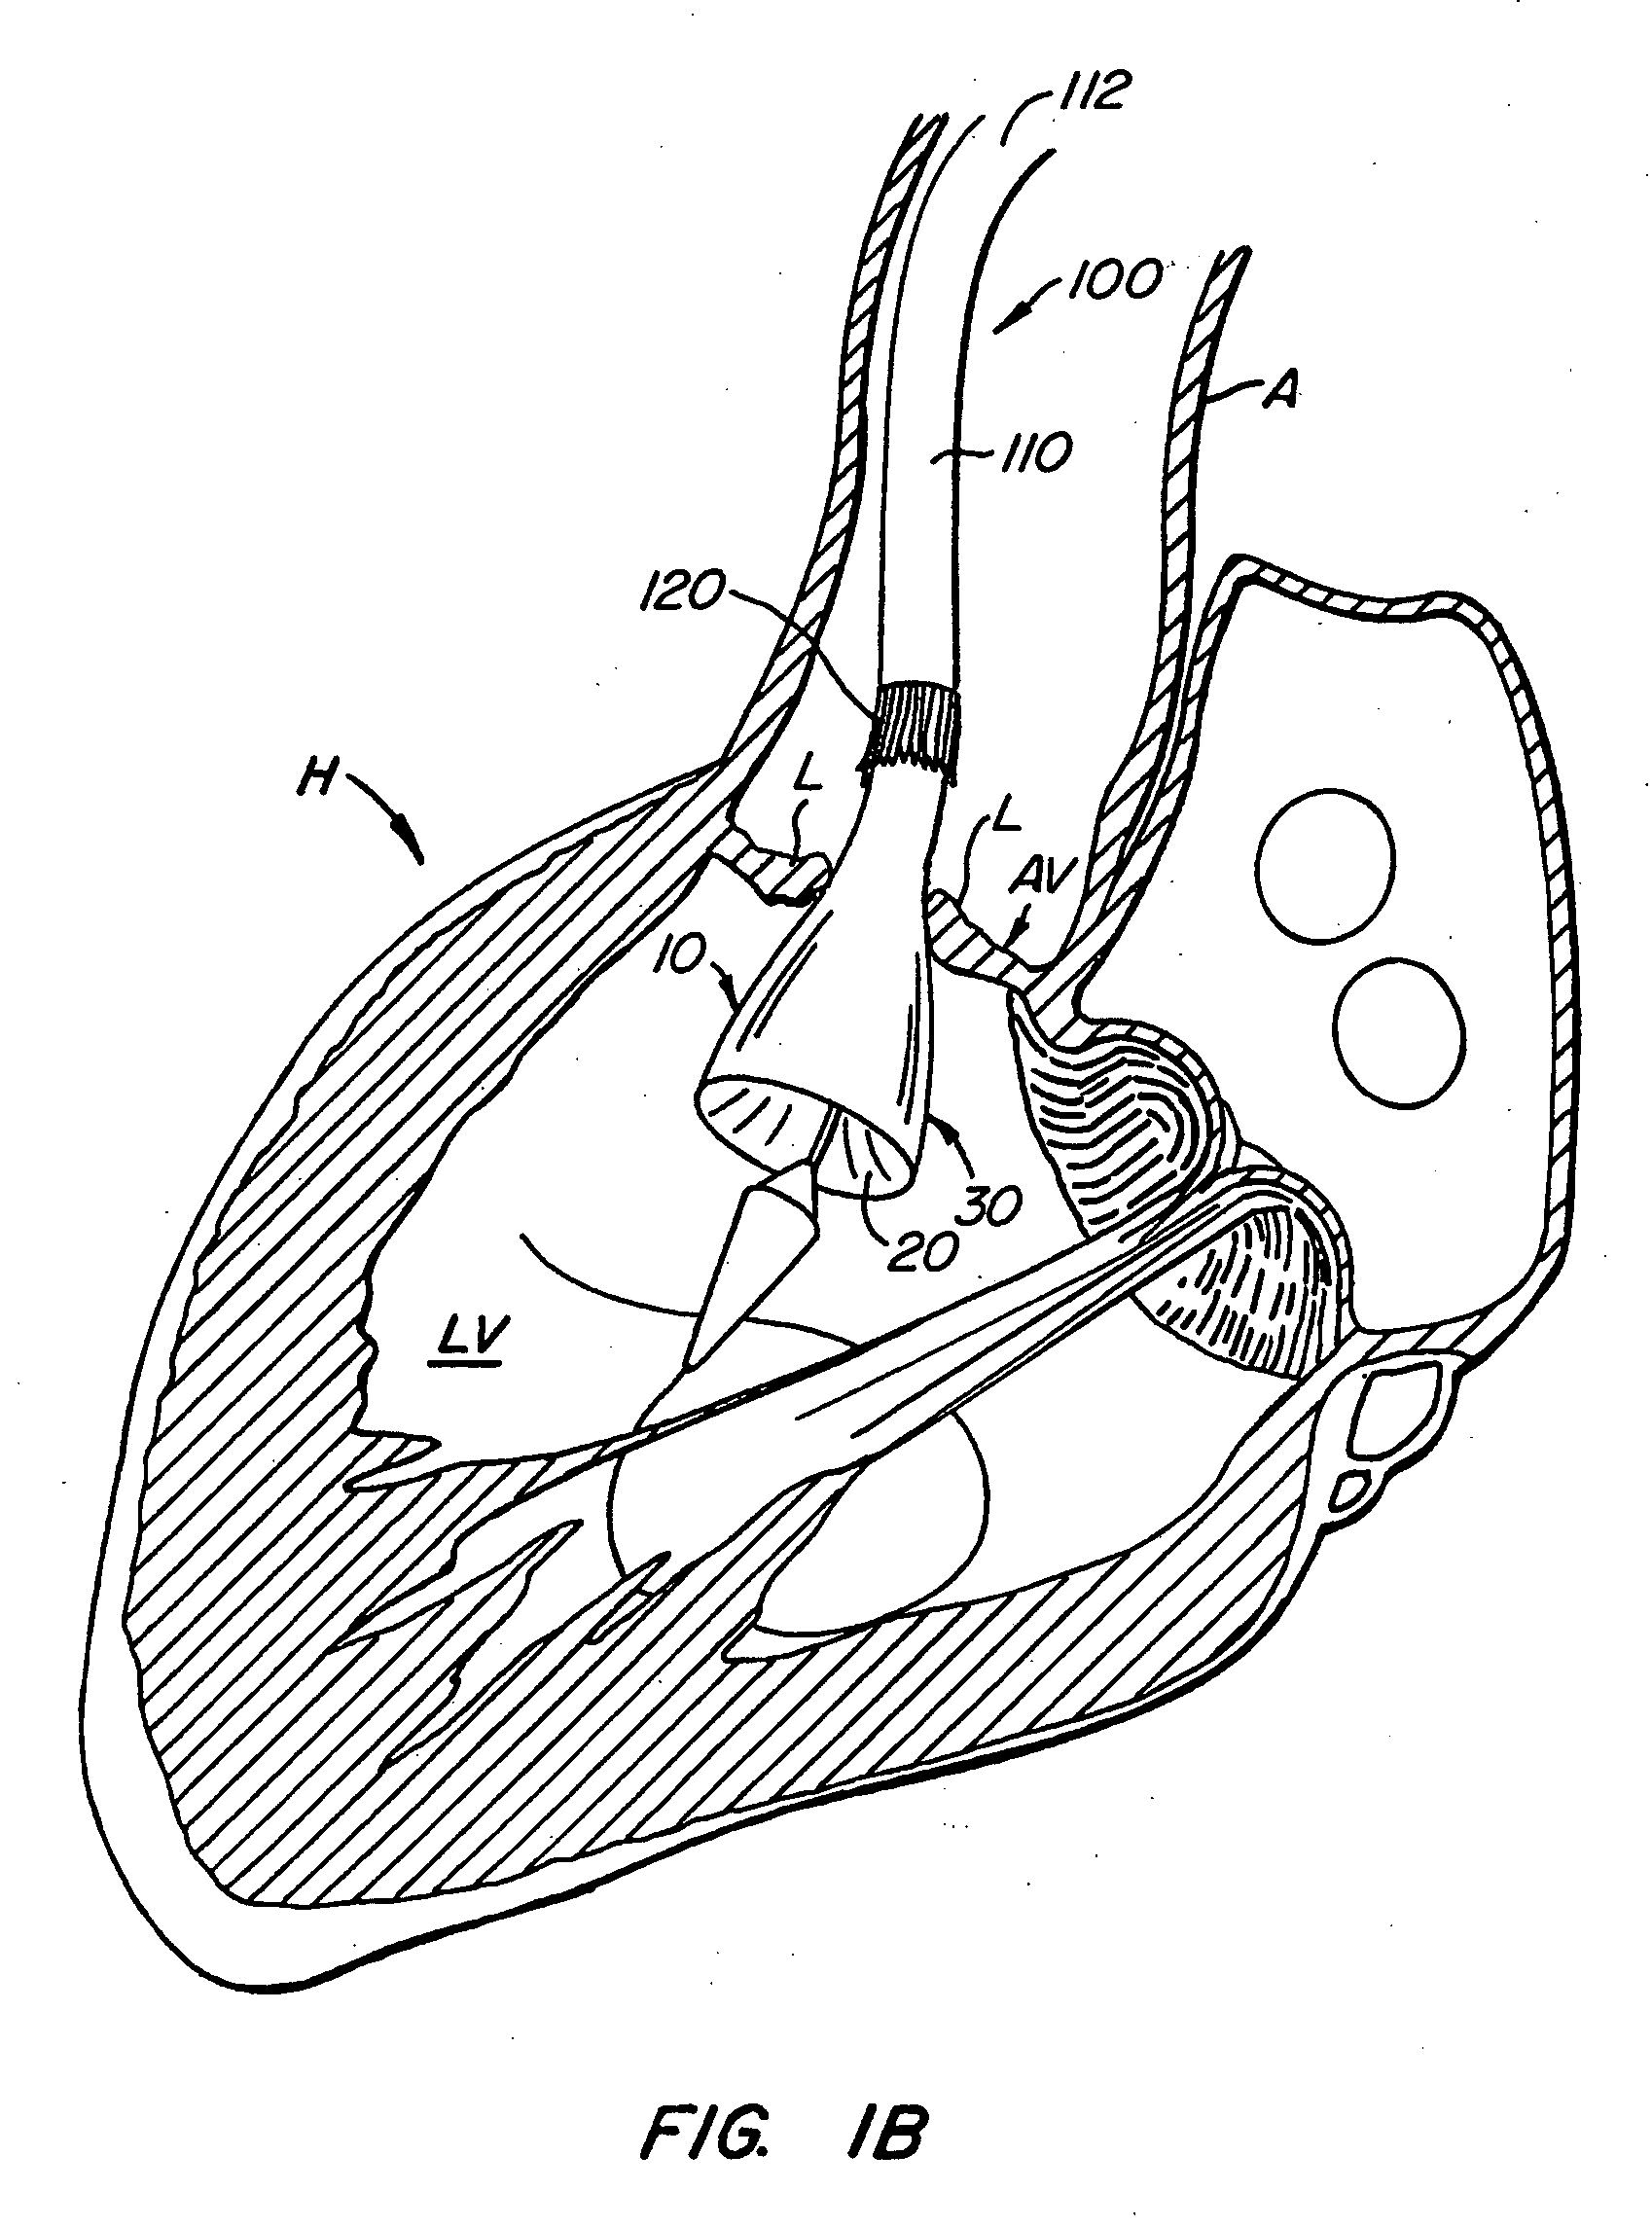 Apparatus and methods for protecting against embolization during endovascular heart valve replacement